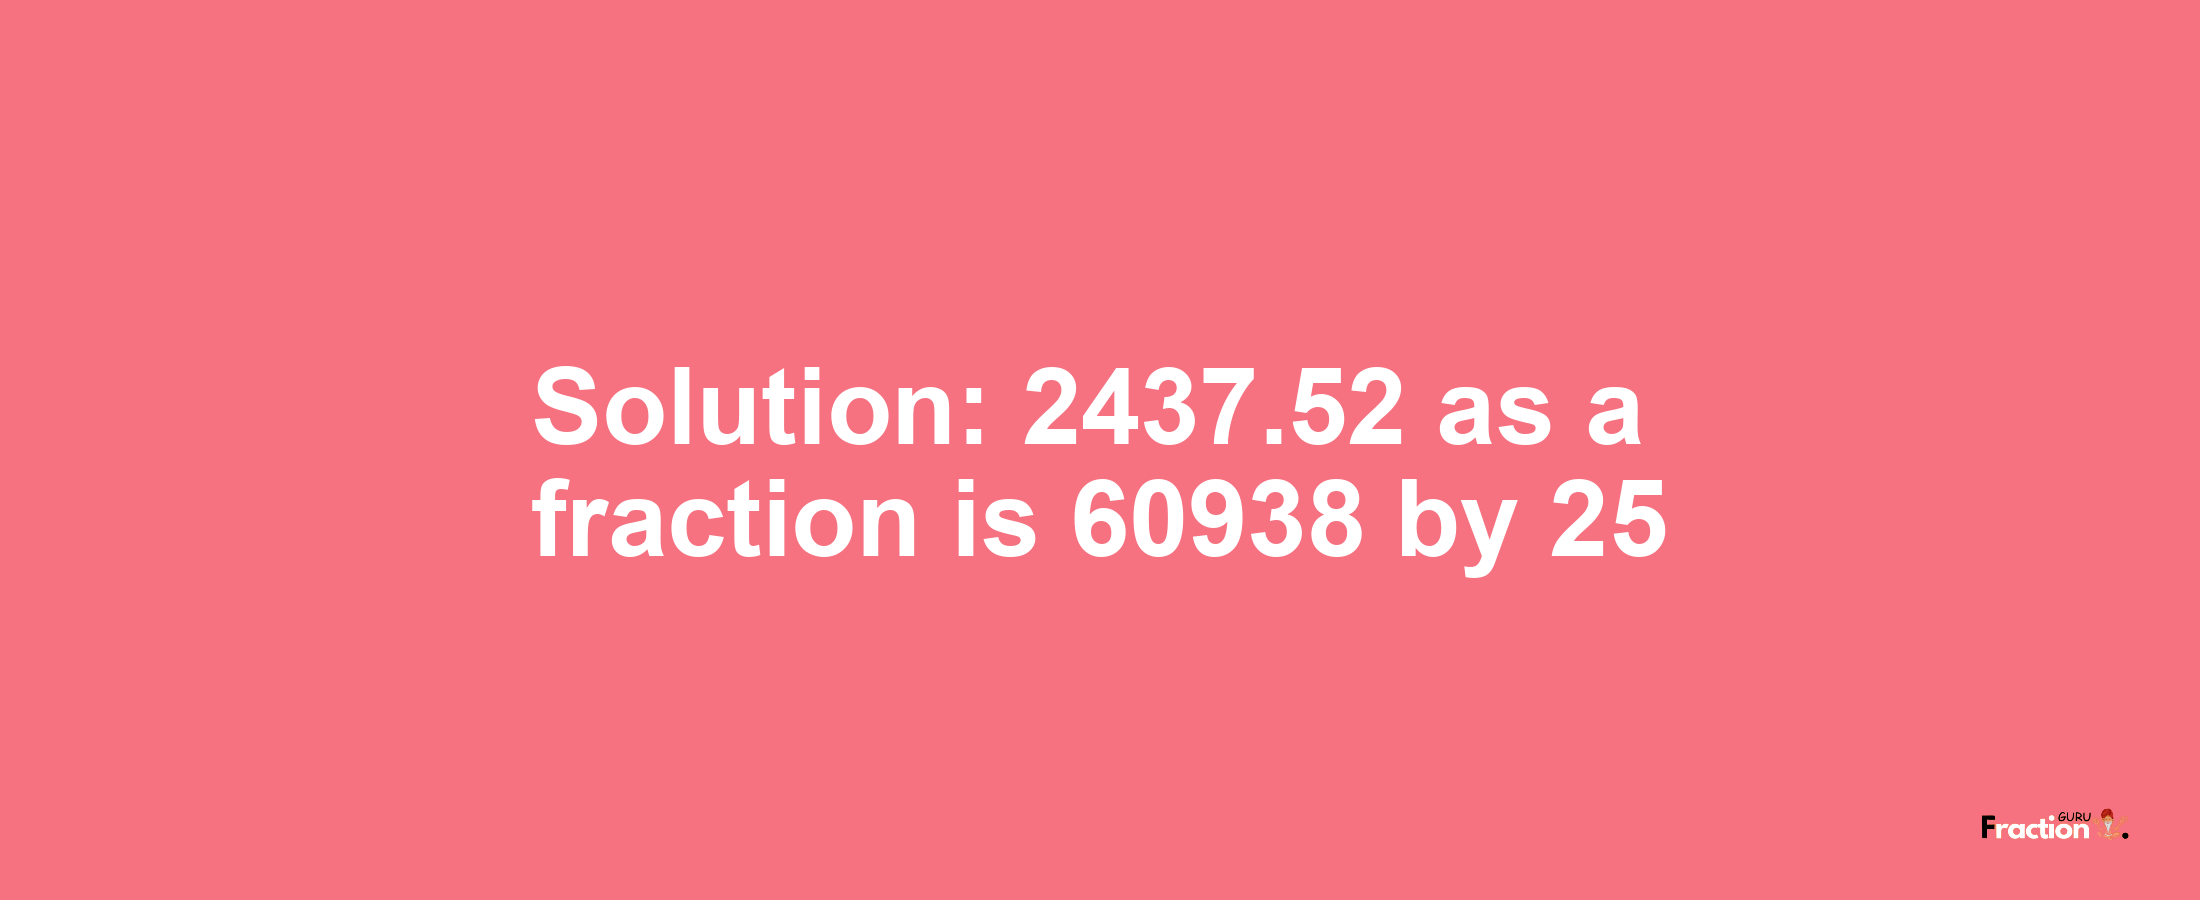 Solution:2437.52 as a fraction is 60938/25